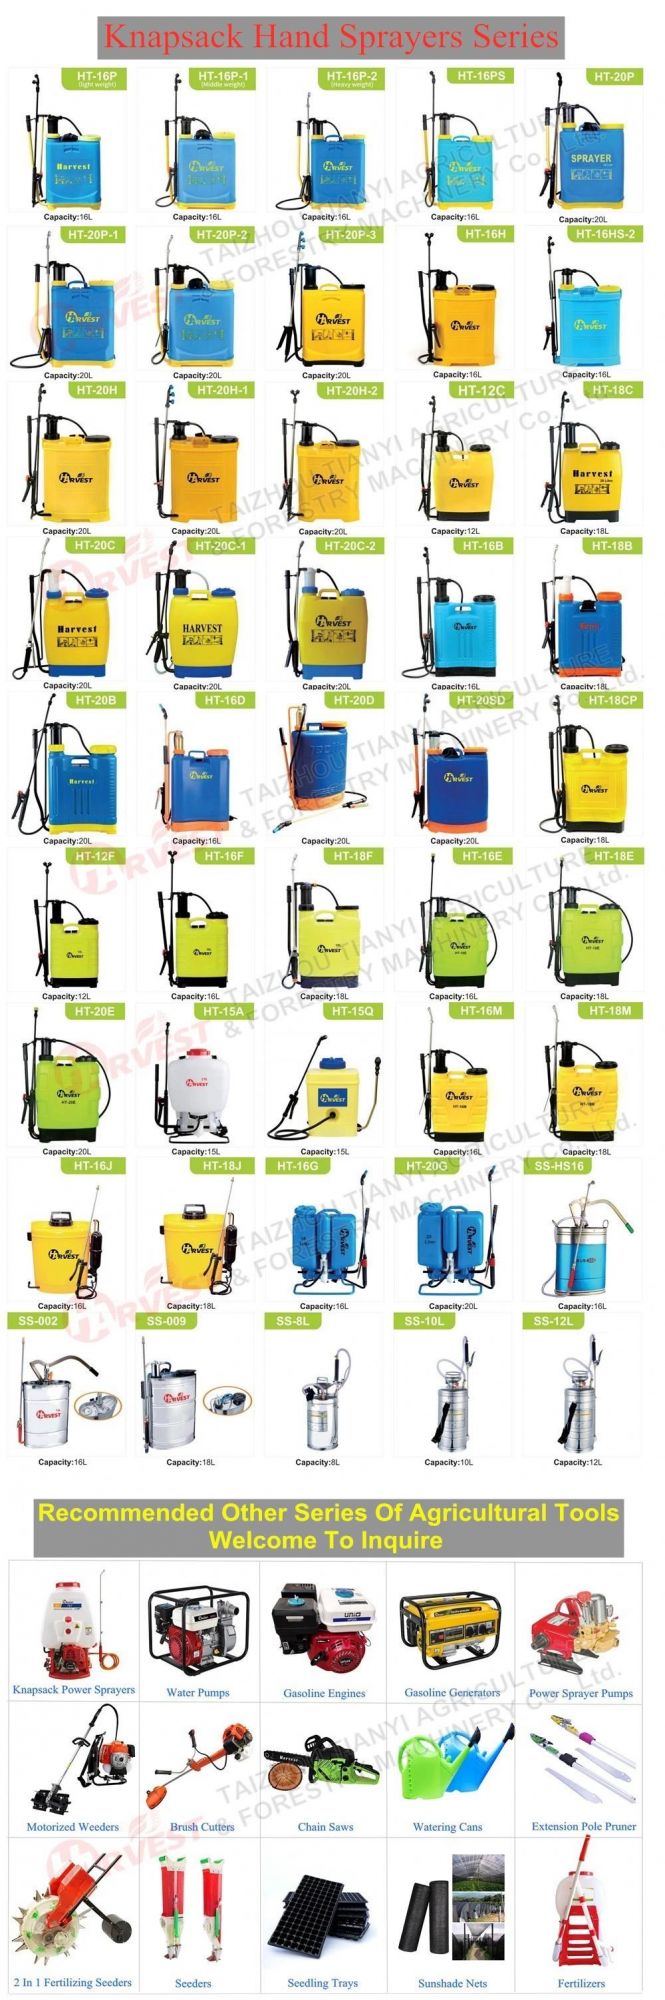 Disinfection Agricultural Knapsack Malaysia Style Backpack Hand Sprayer (HT-16J)